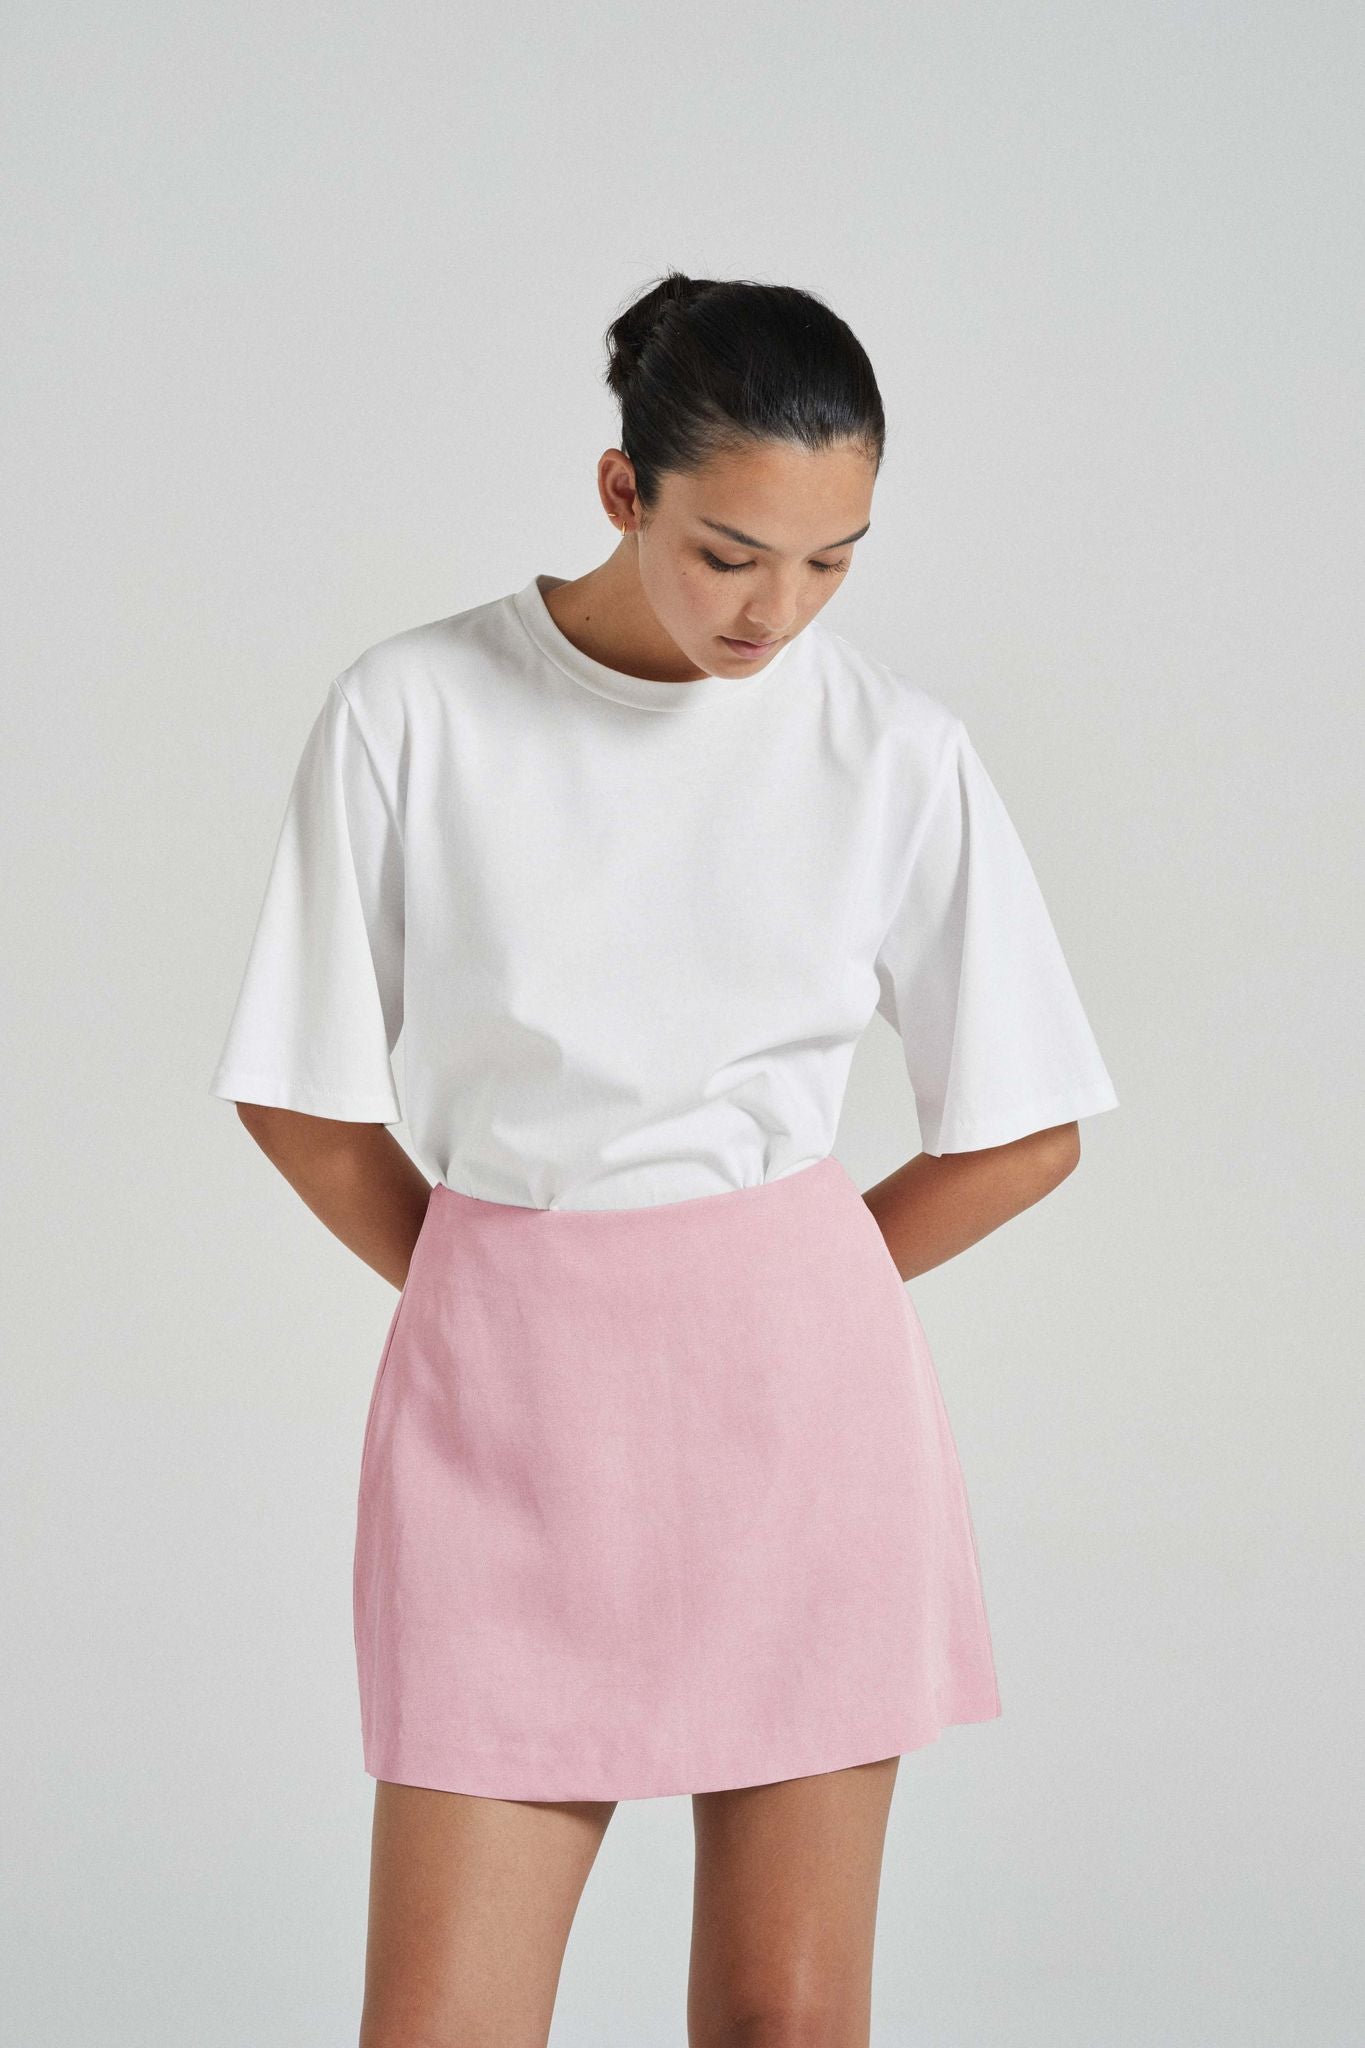 Friends with Frank Lea Mini Skirt - Pink